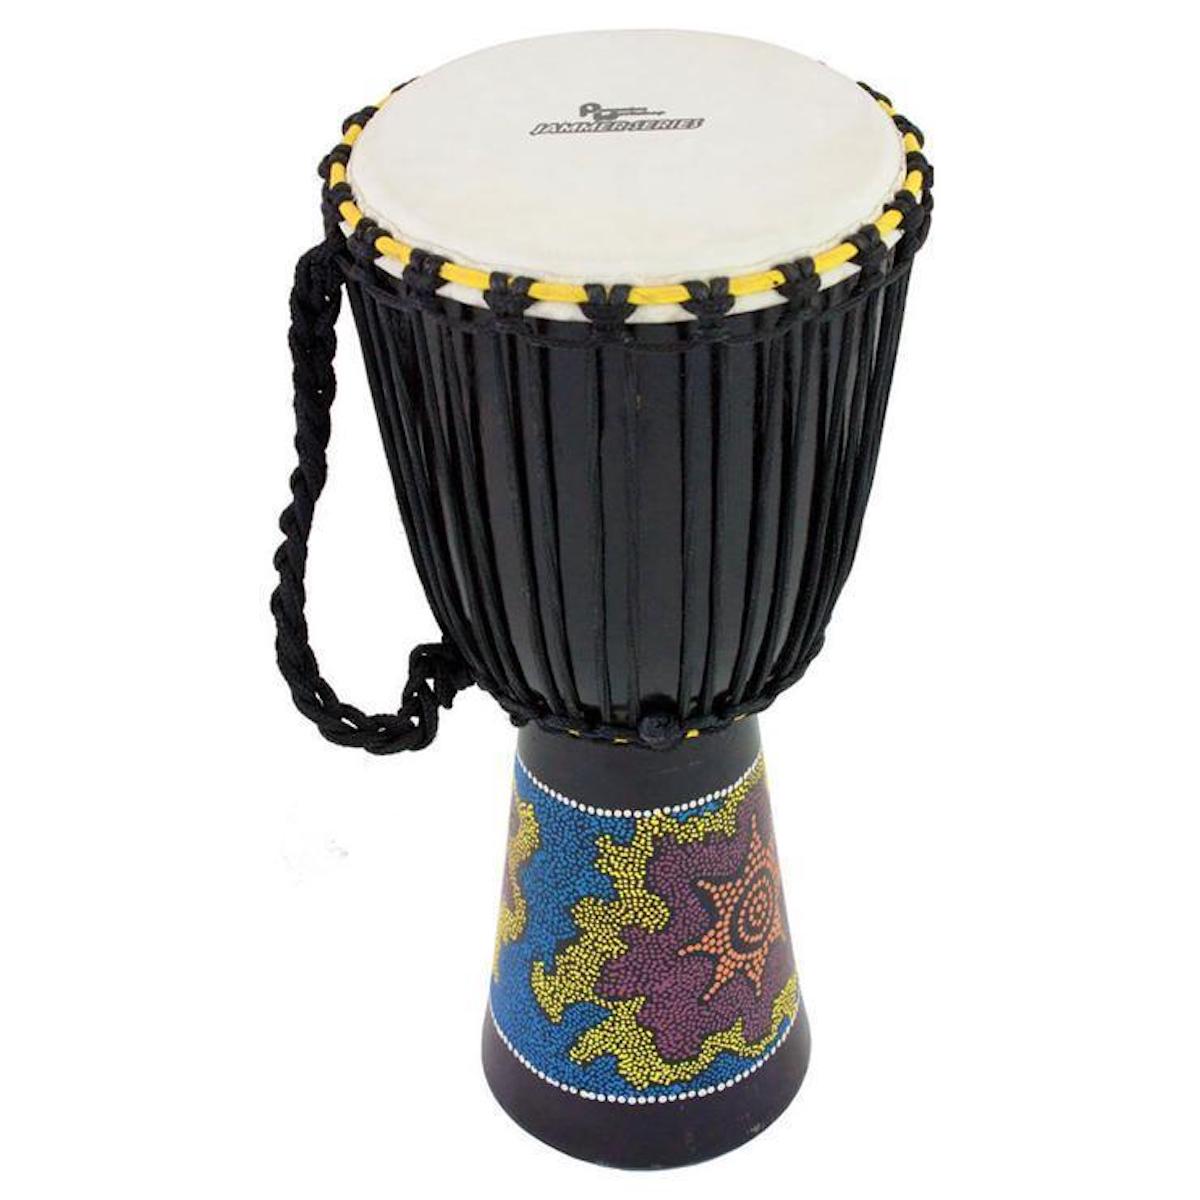 Percussion Workshop Jammer Djembe, 10" Head (various designs)